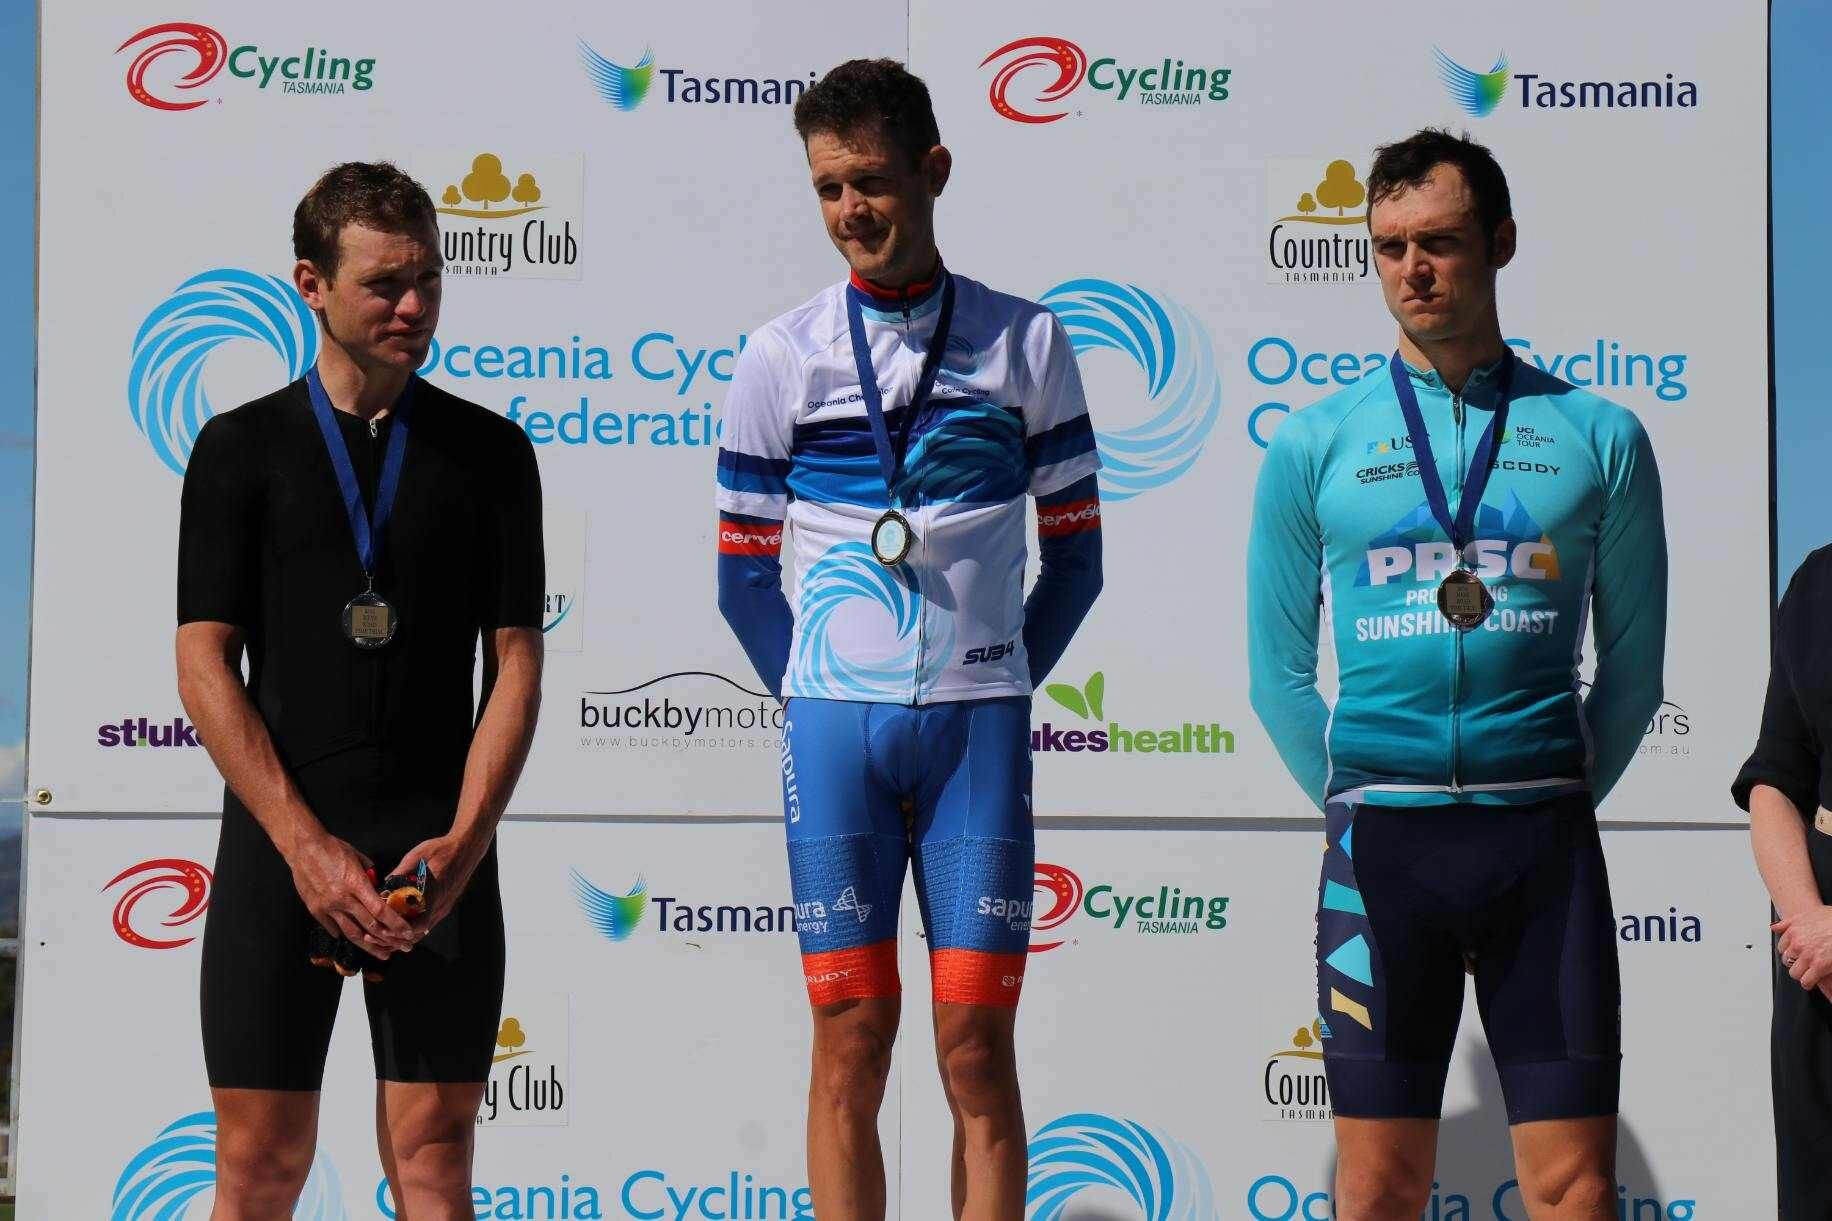 Benjamin Dyball was one of hosts Australia's five gold medallists on the opening day of the 2019 Oceania Road Championships in Tasmania, winning the elite men's time trial event ©Caitlin Johnston